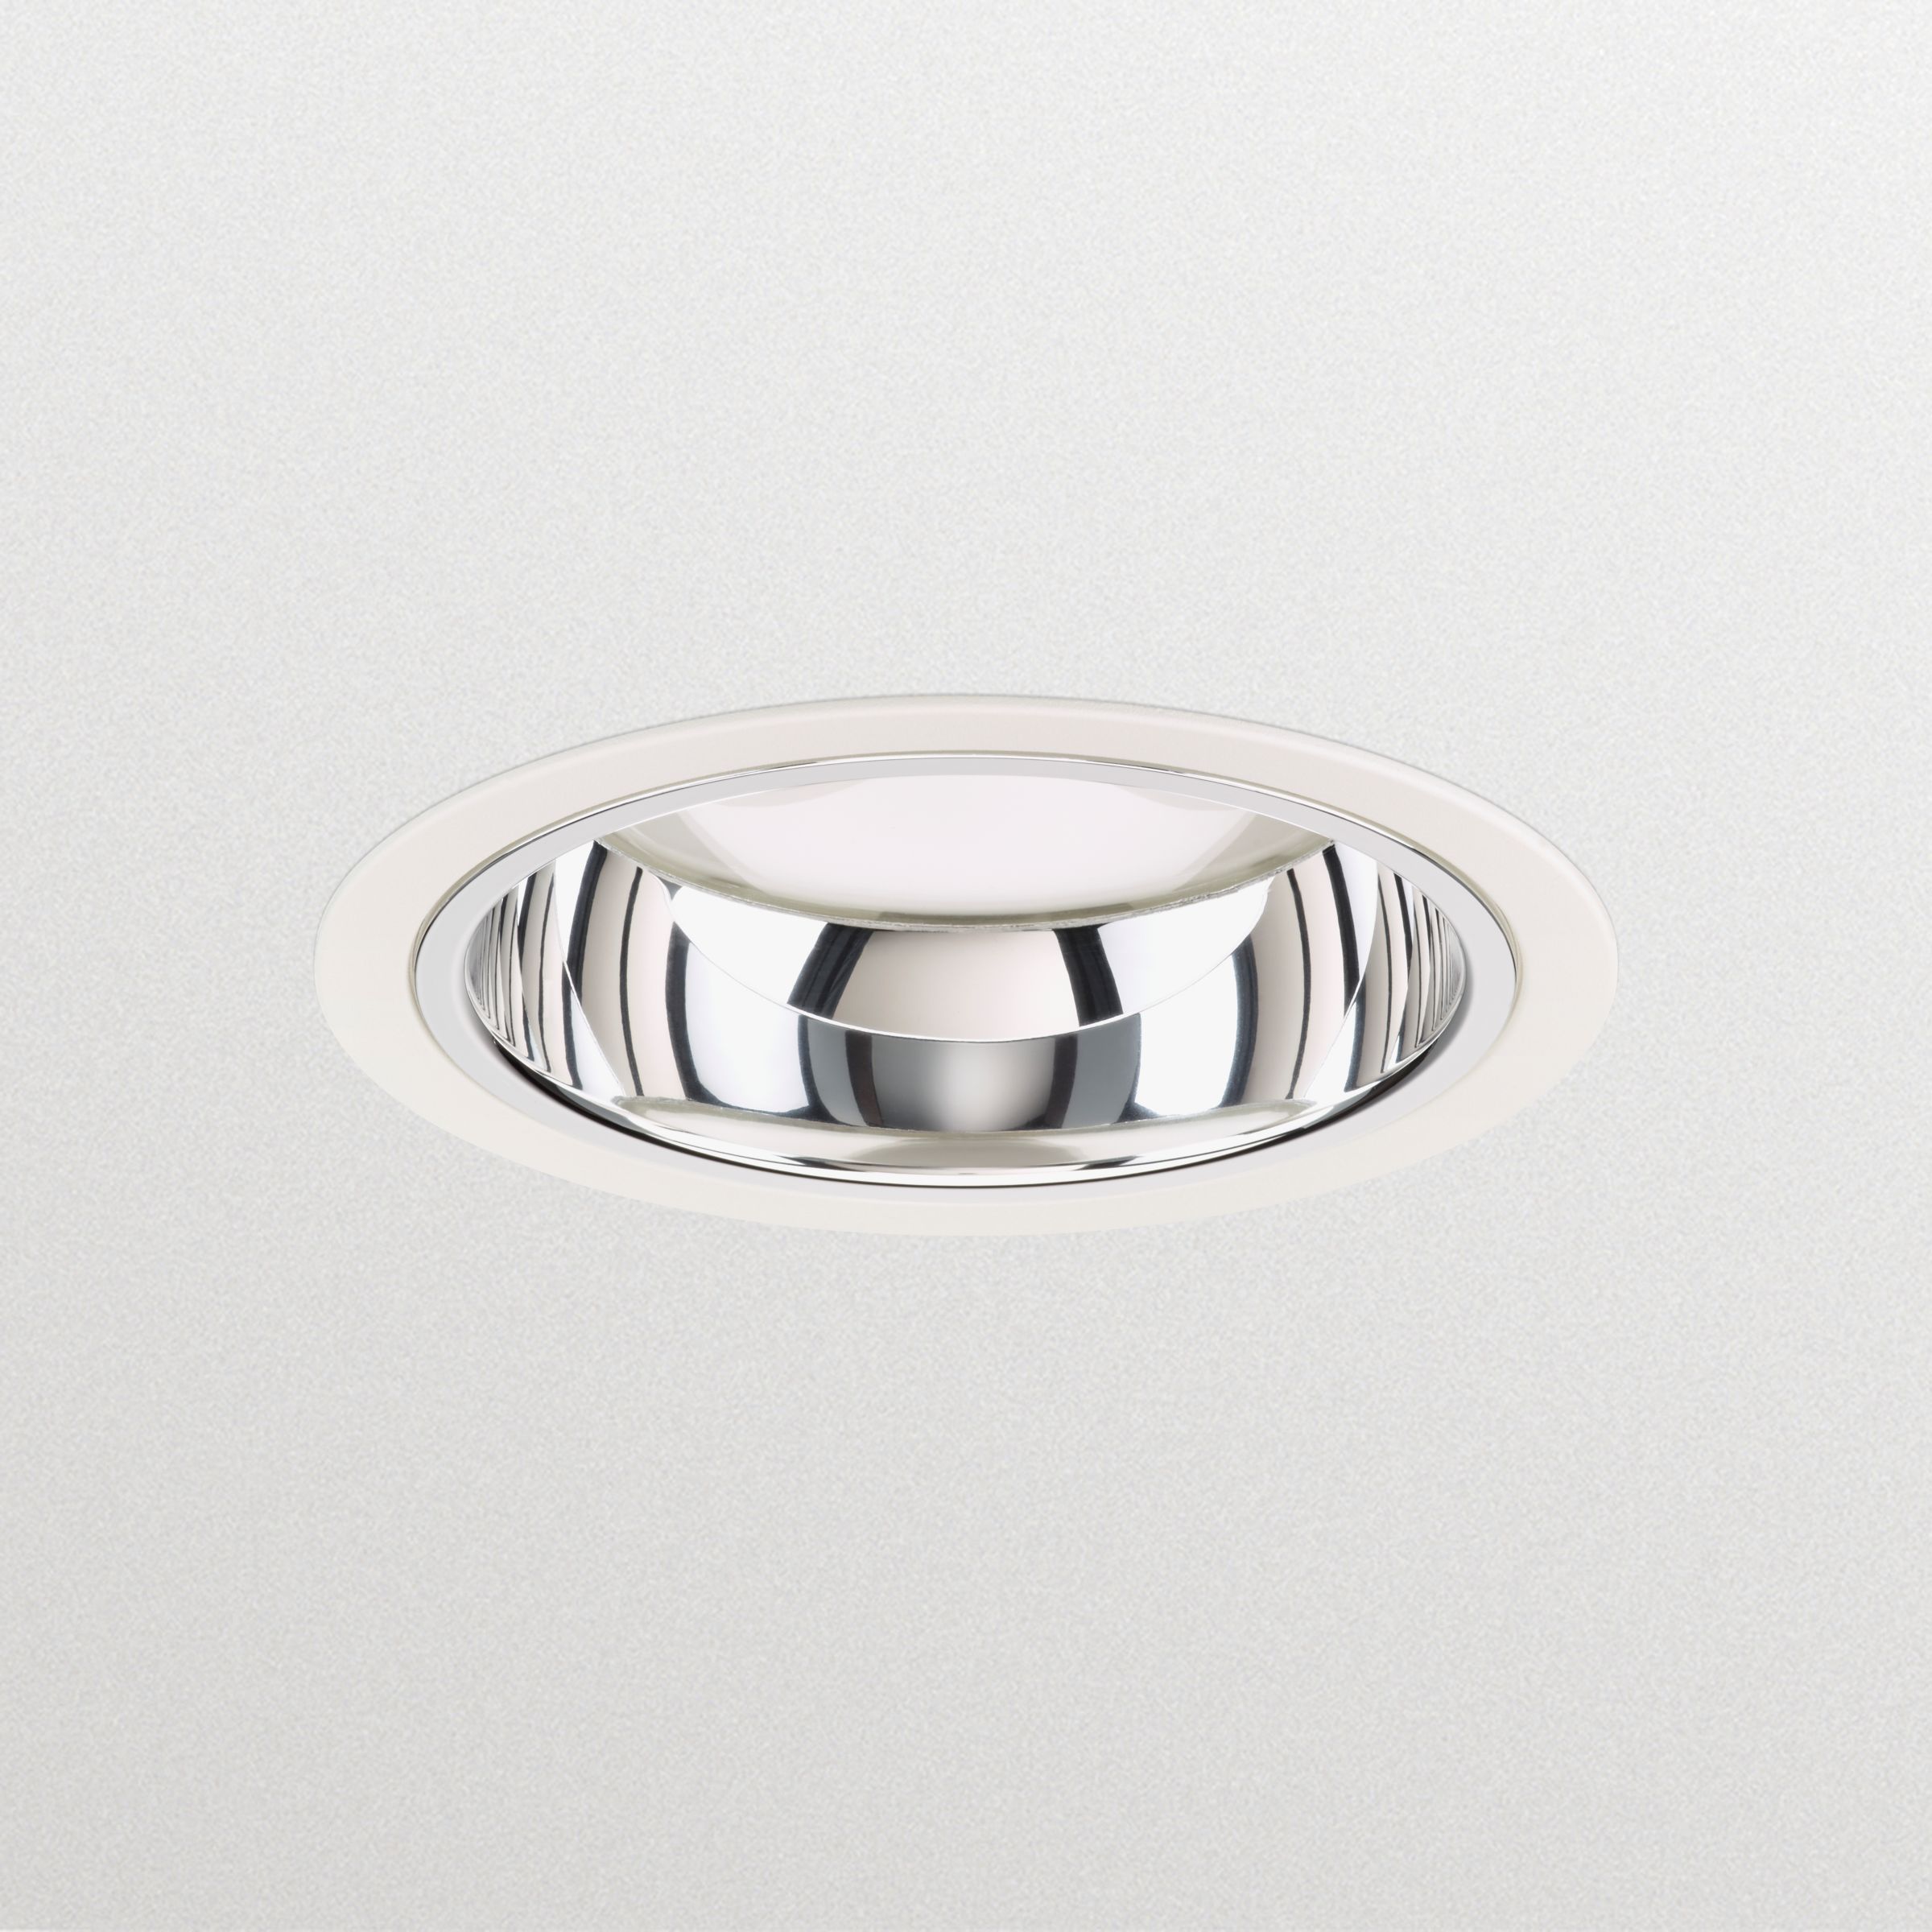 LuxSpace recessed | | Philips lighting